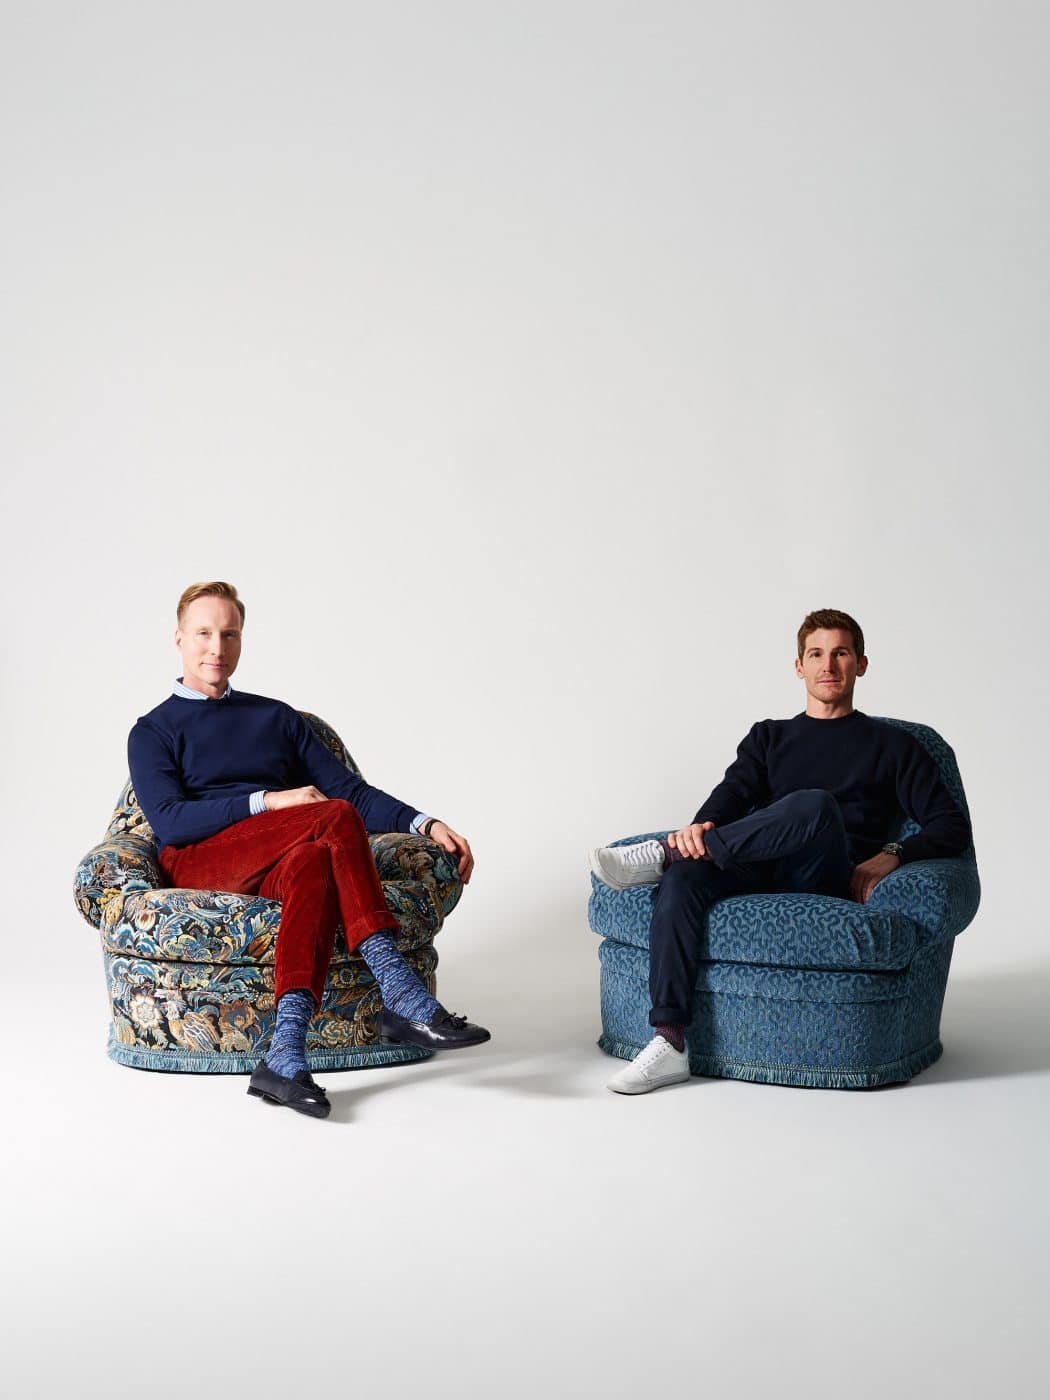 Portrait of And Design furniture company founders and designers  Martin Brudnizki and Nicholas James seated in their Wickham armchairs